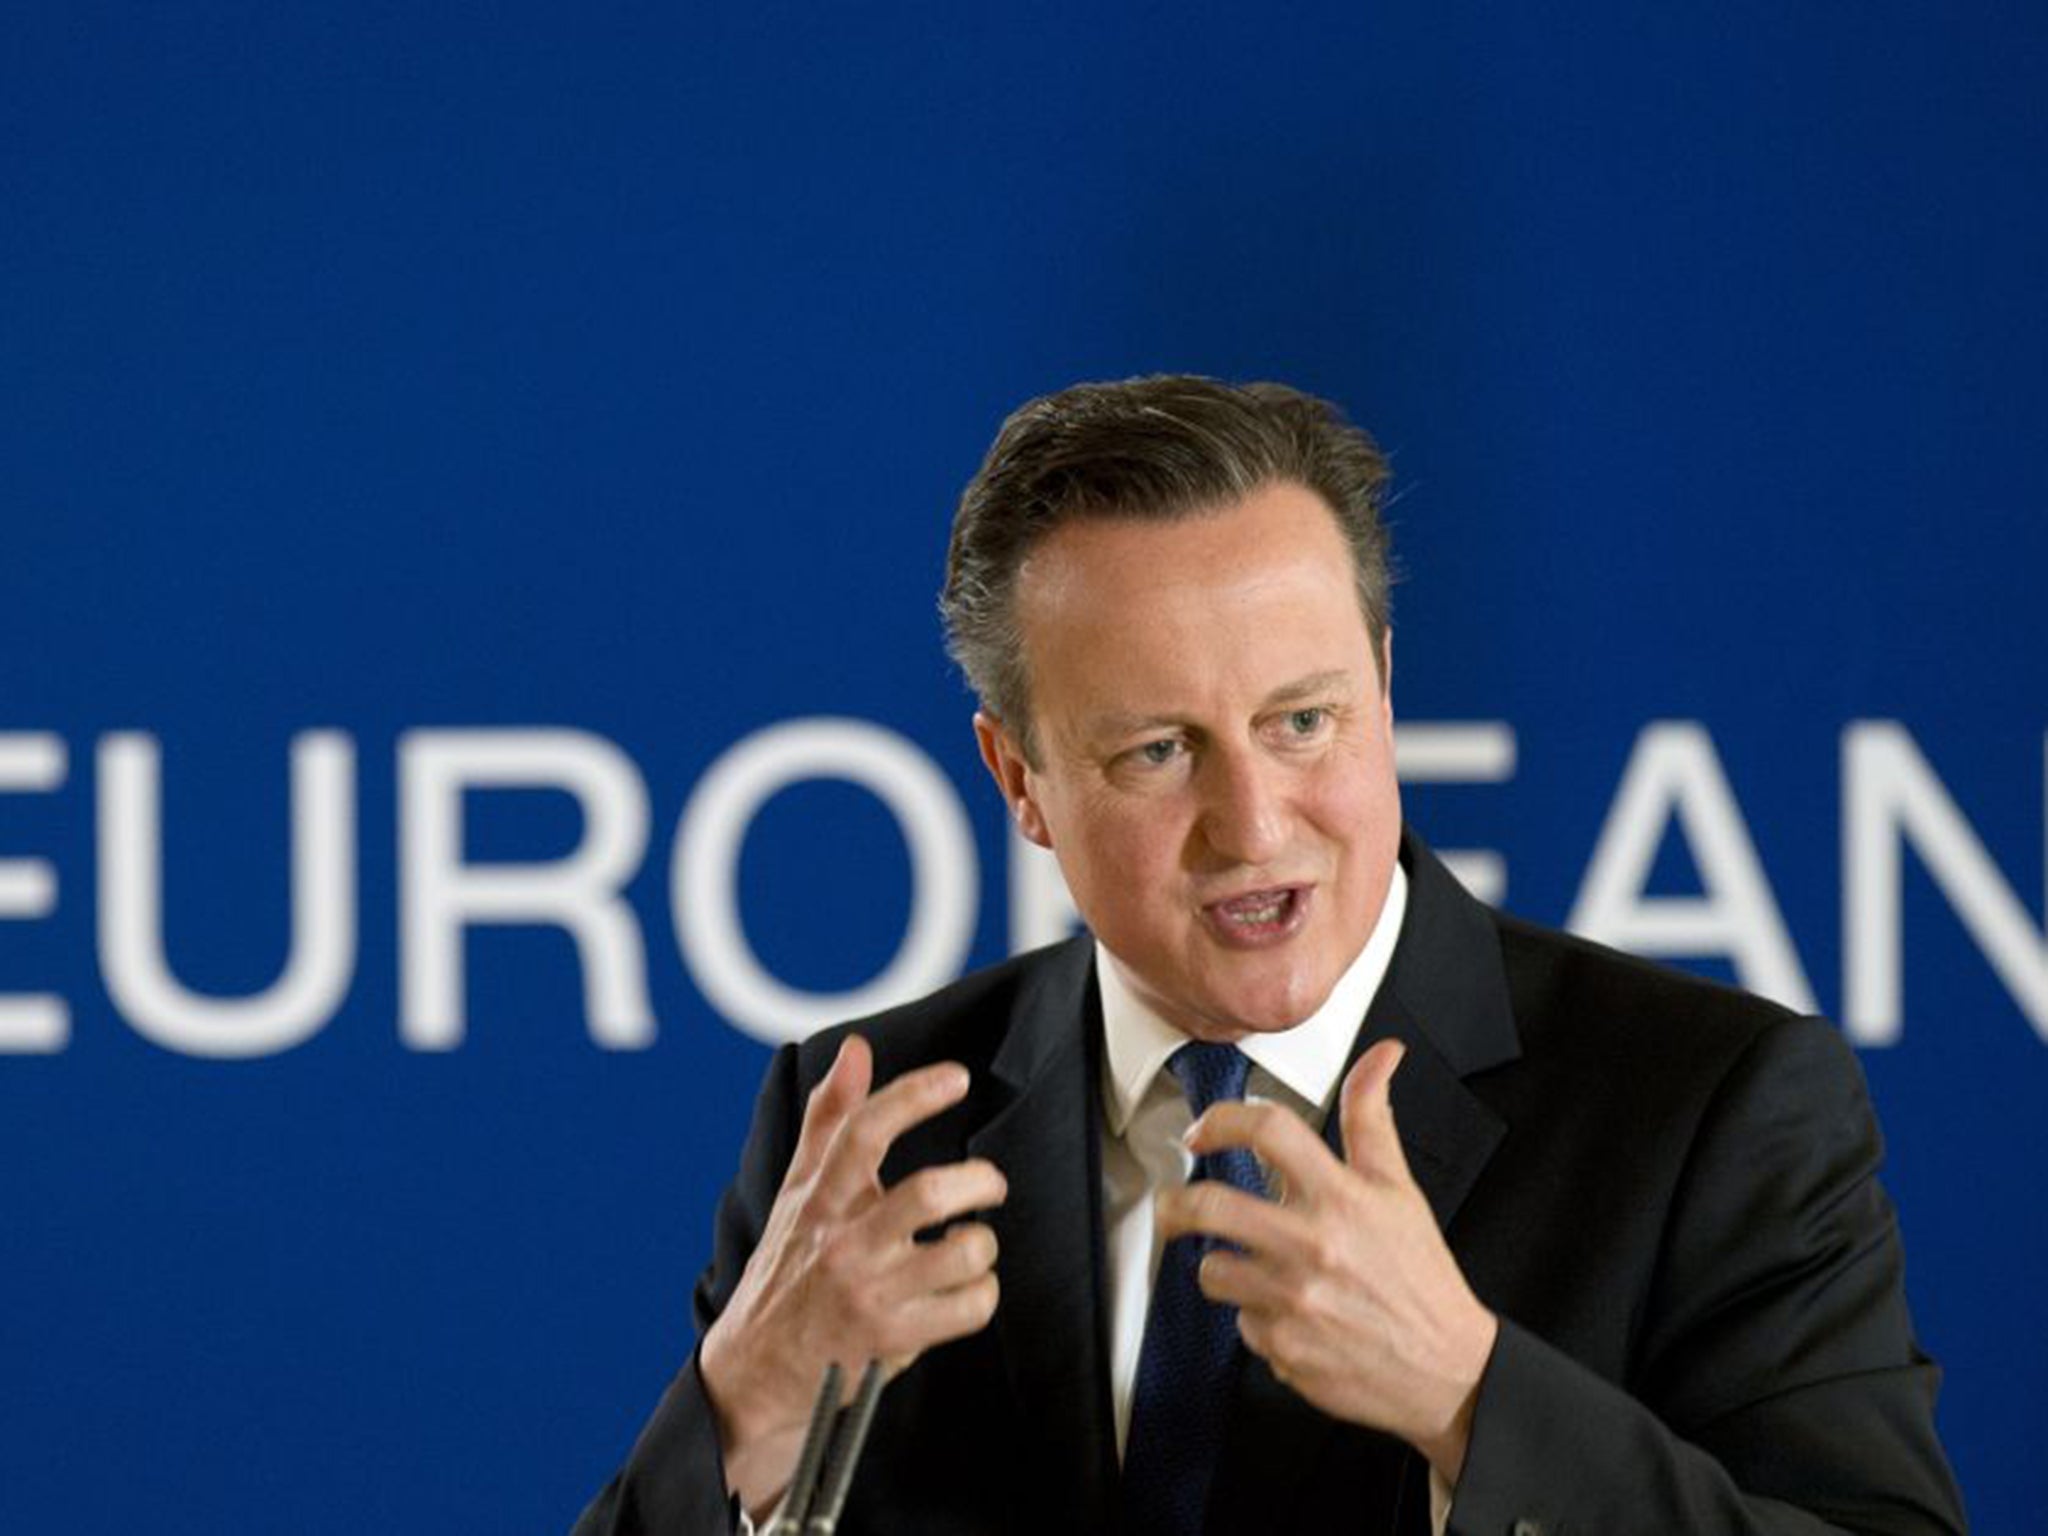 David Cameron is confident that other EU leaders want reform too